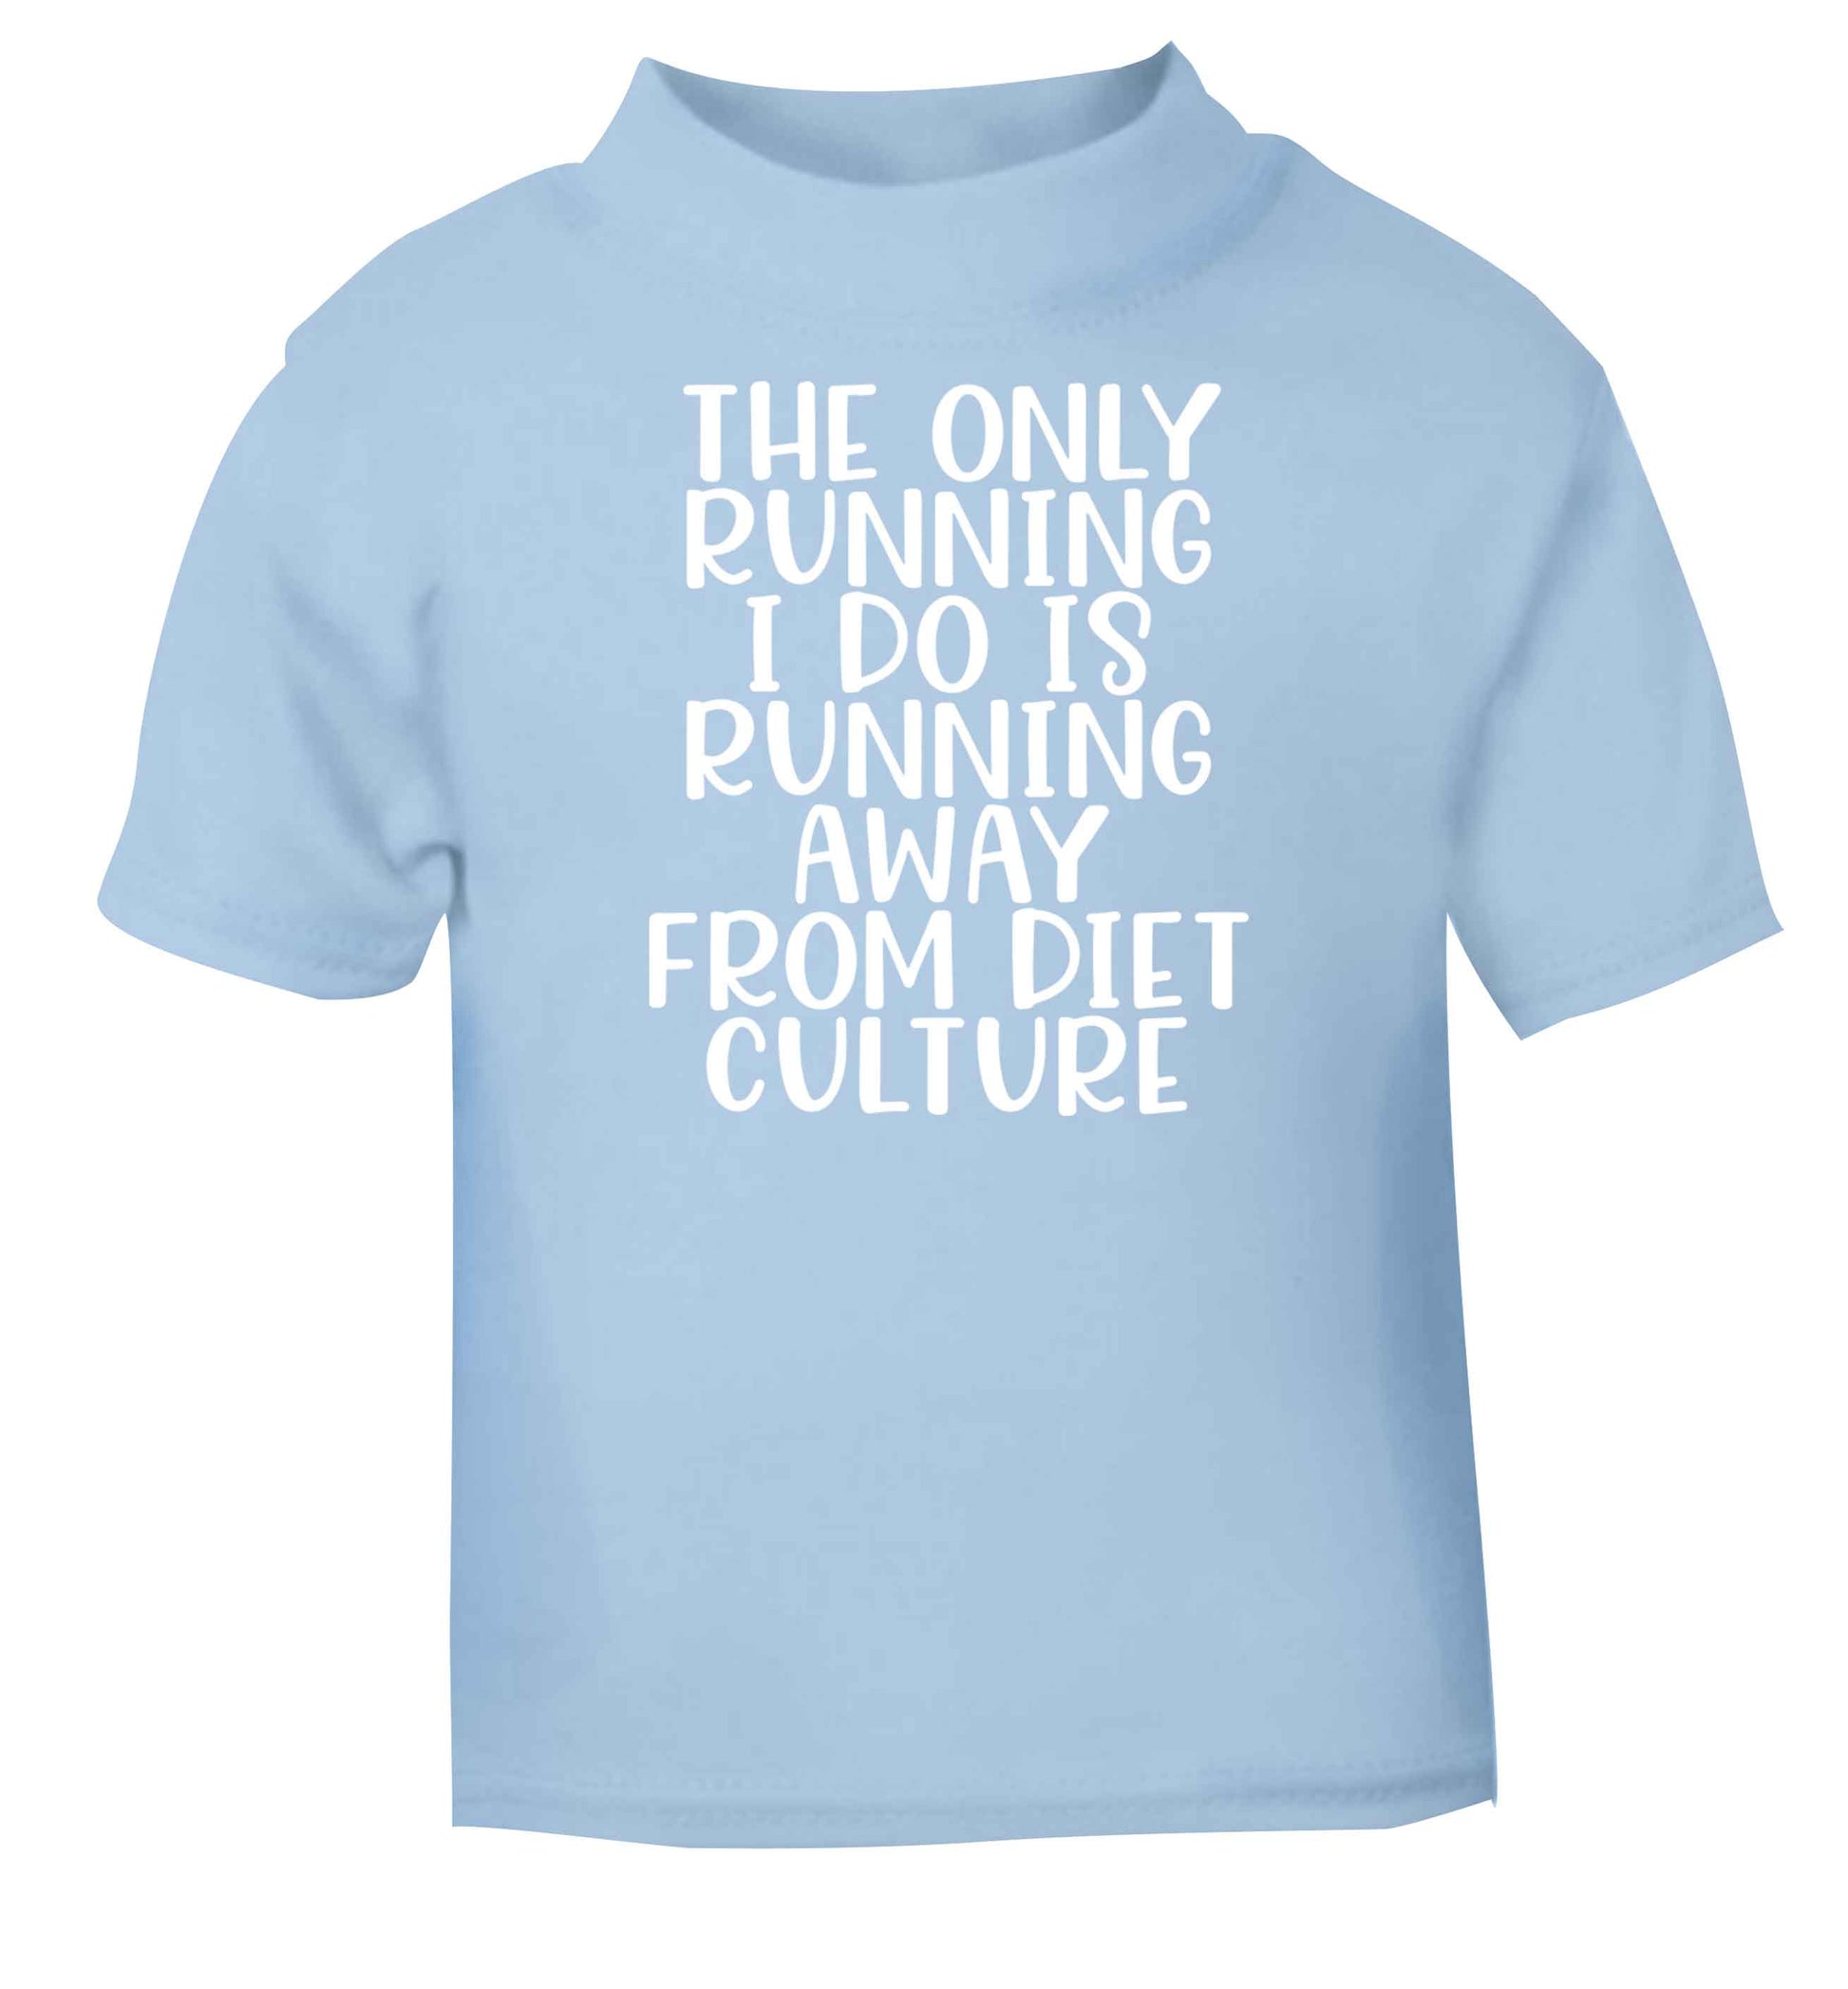 The only running I do is running away from diet culture light blue baby toddler Tshirt 2 Years